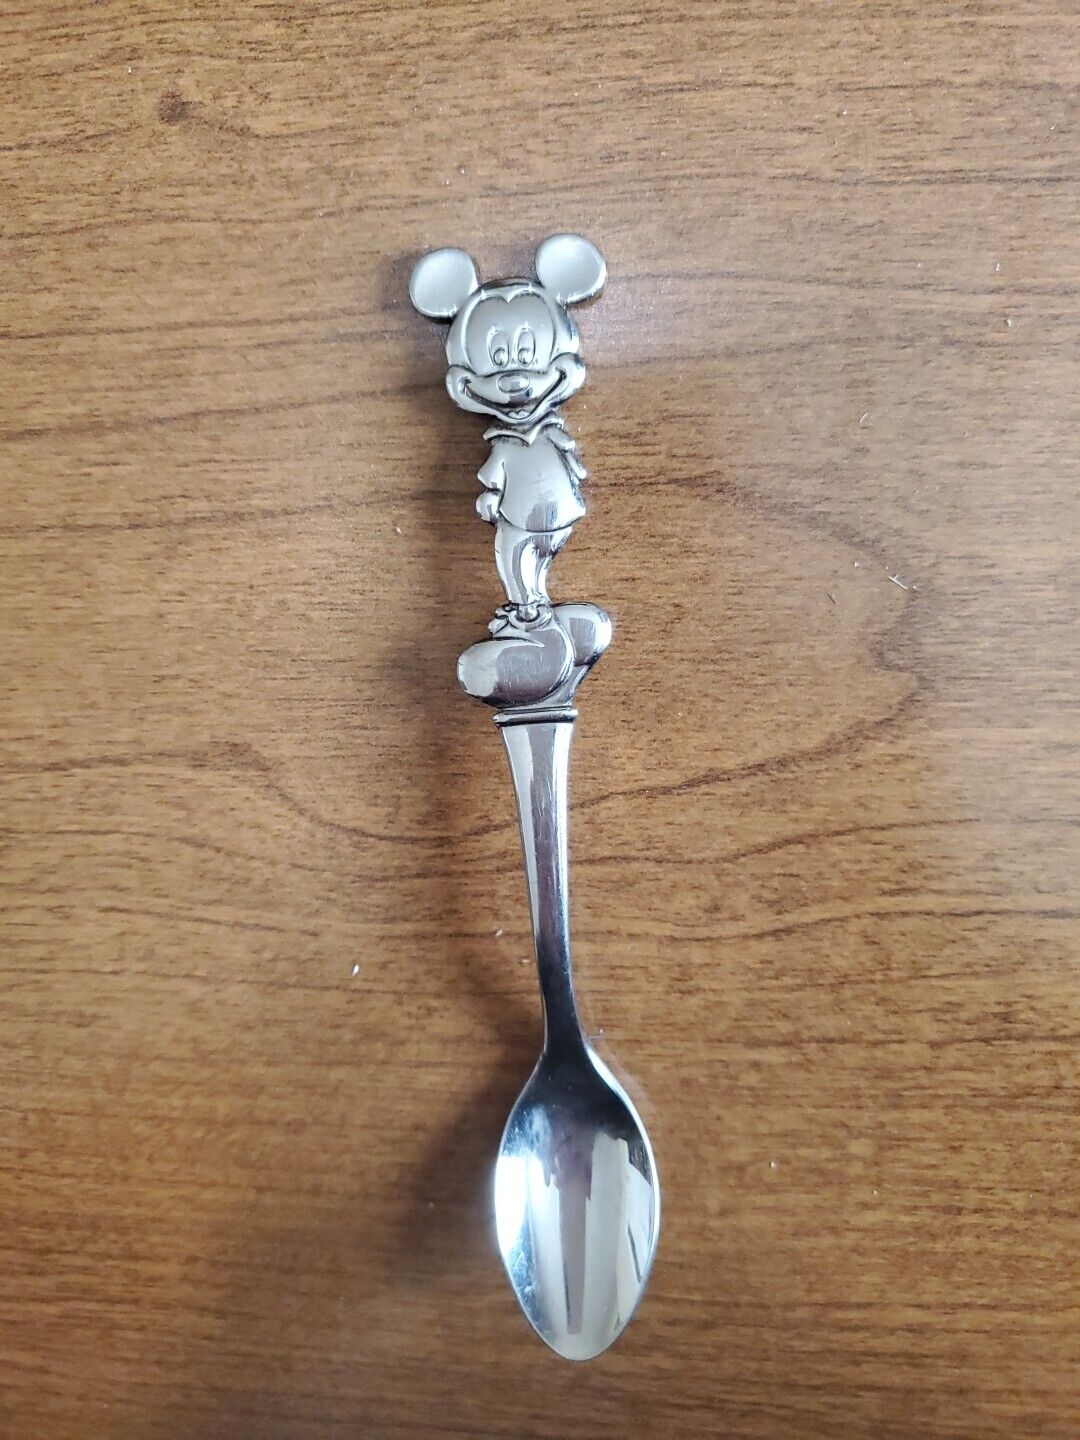 Vintage Disney Reed & Barton Mickey Mouse Stainless Steel Infant Baby Spoon 